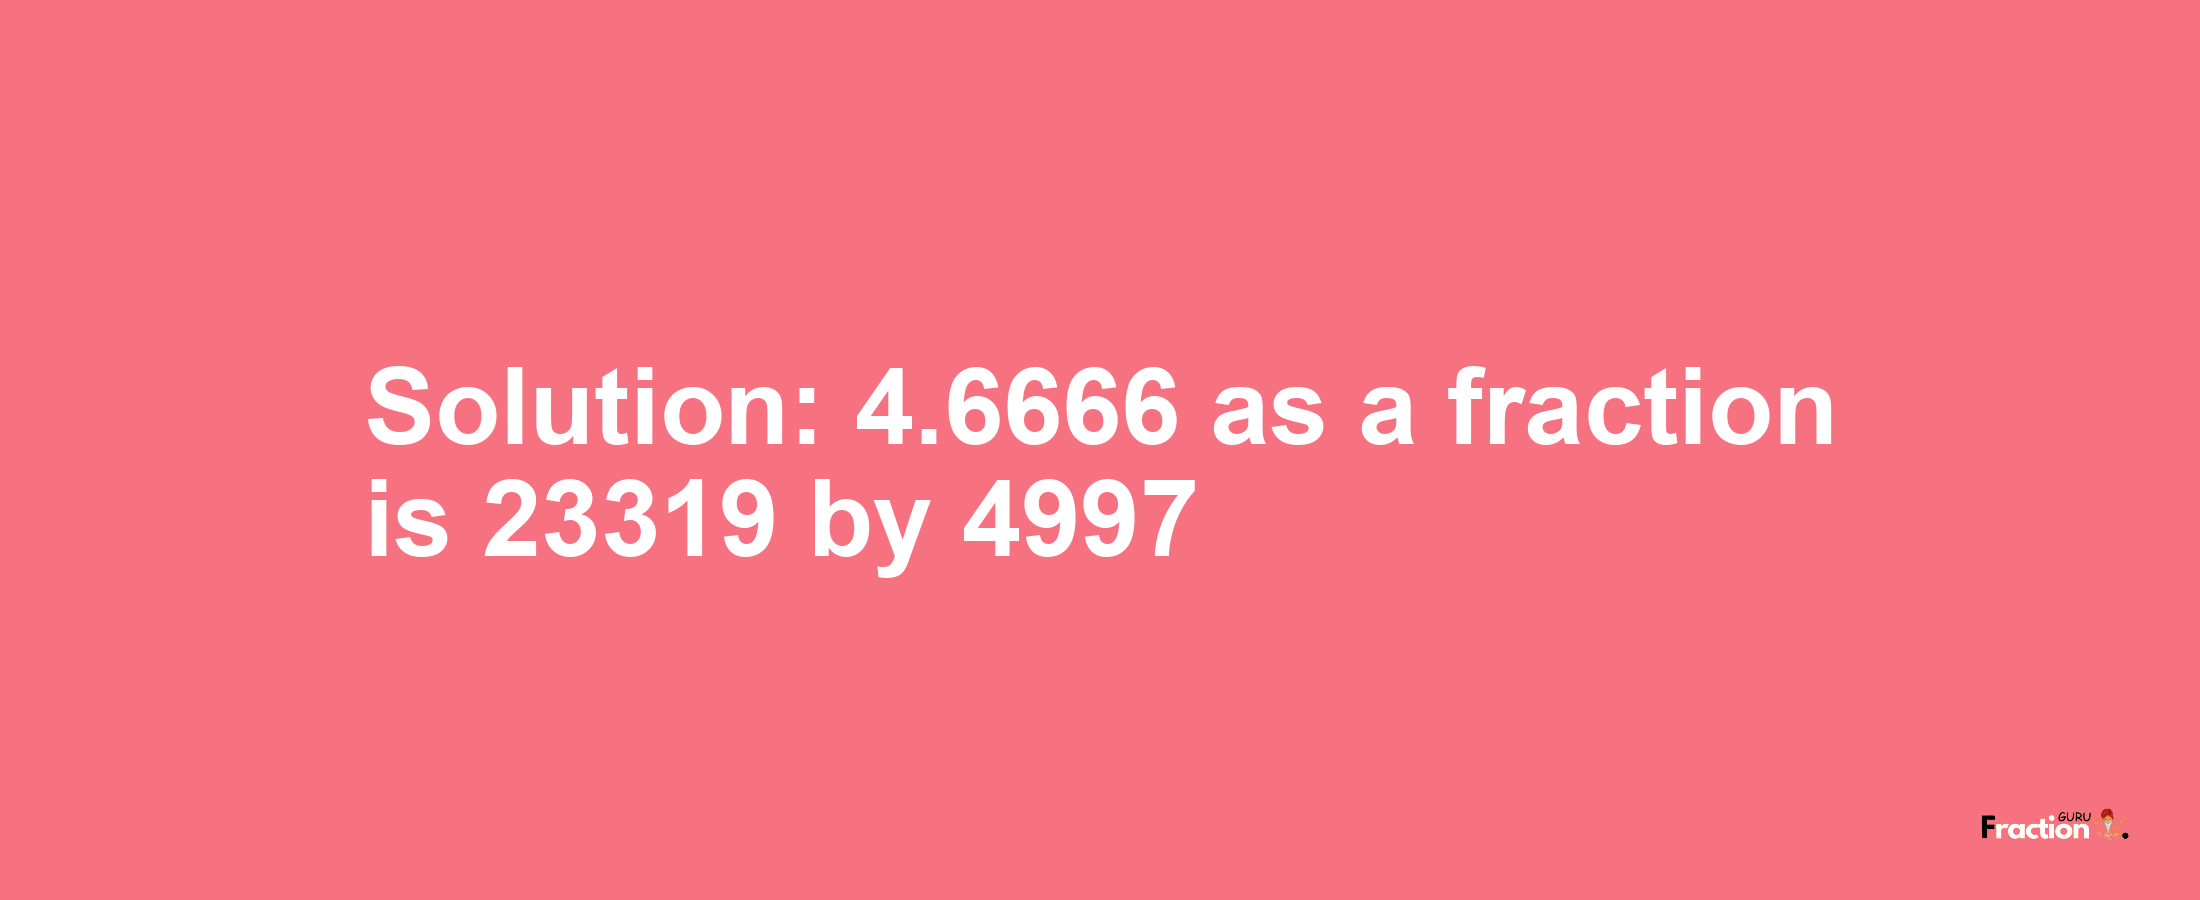 Solution:4.6666 as a fraction is 23319/4997